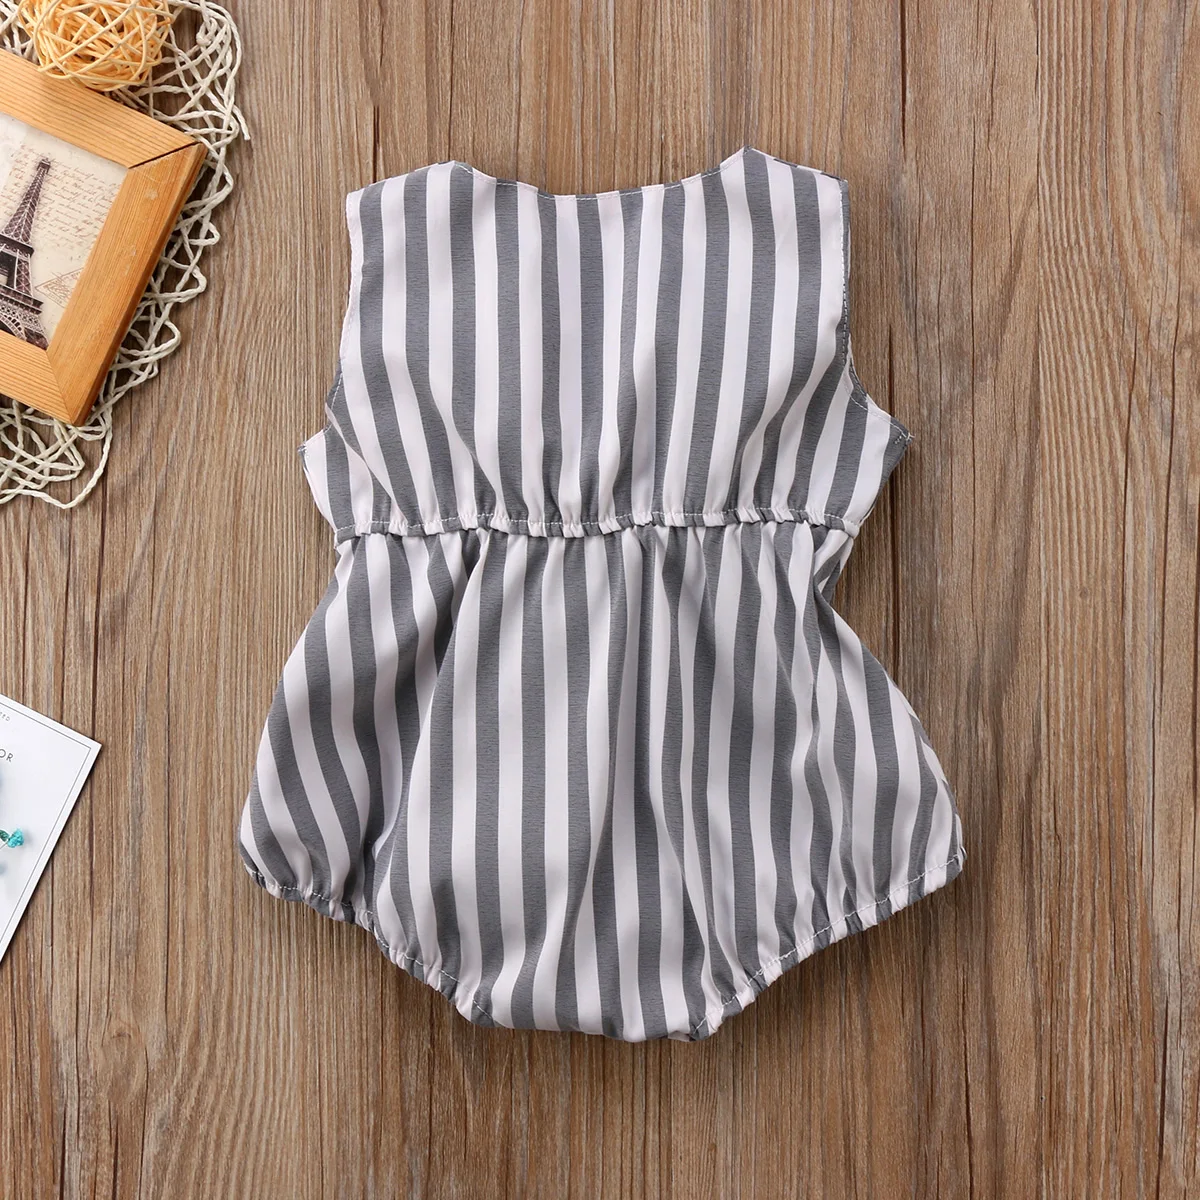 new Adorable Newborn Baby Girls Bow Stripes Jumpsuit Romper Clothes Outfits Summer Sunsuit Baby Clothing